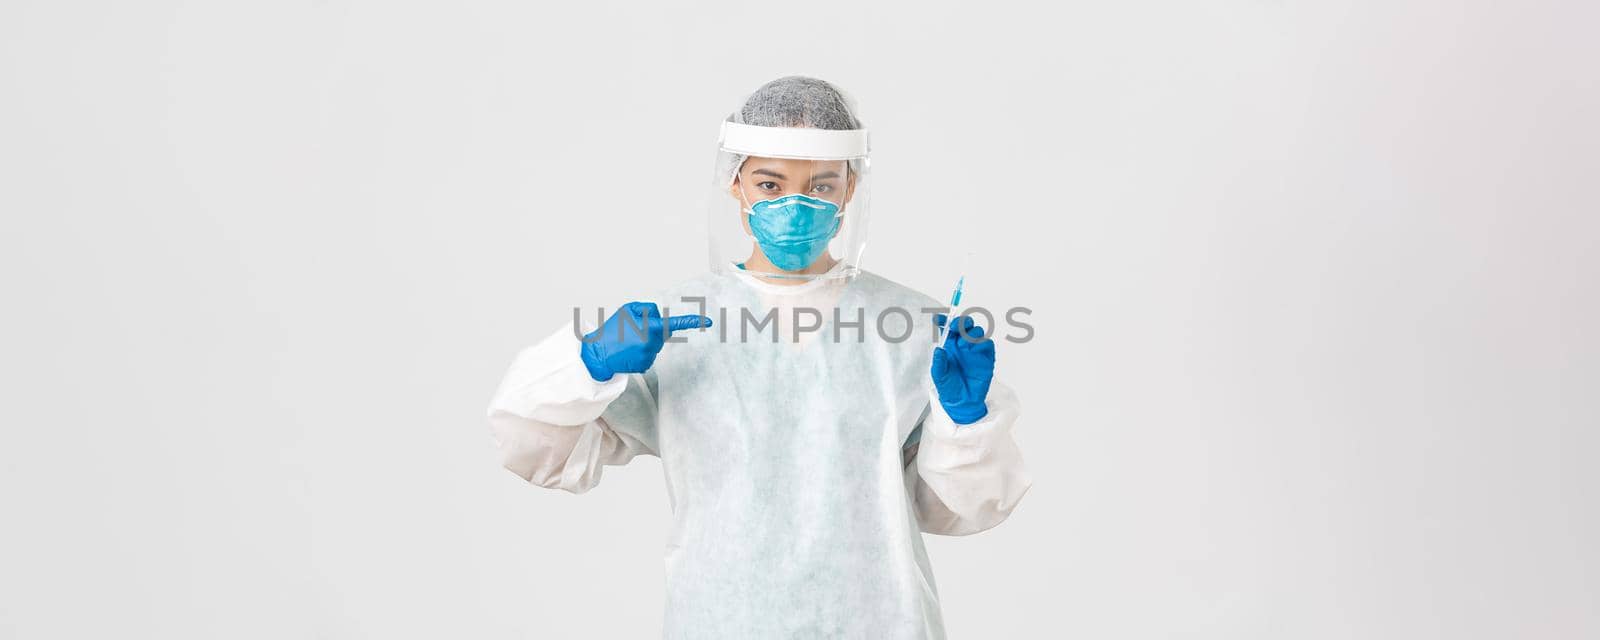 Covid-19, coronavirus disease, healthcare workers concept. Serious asian female doctor, physician in PPE personal protective equipment, pointing finger at syringe with vaccine, white background.